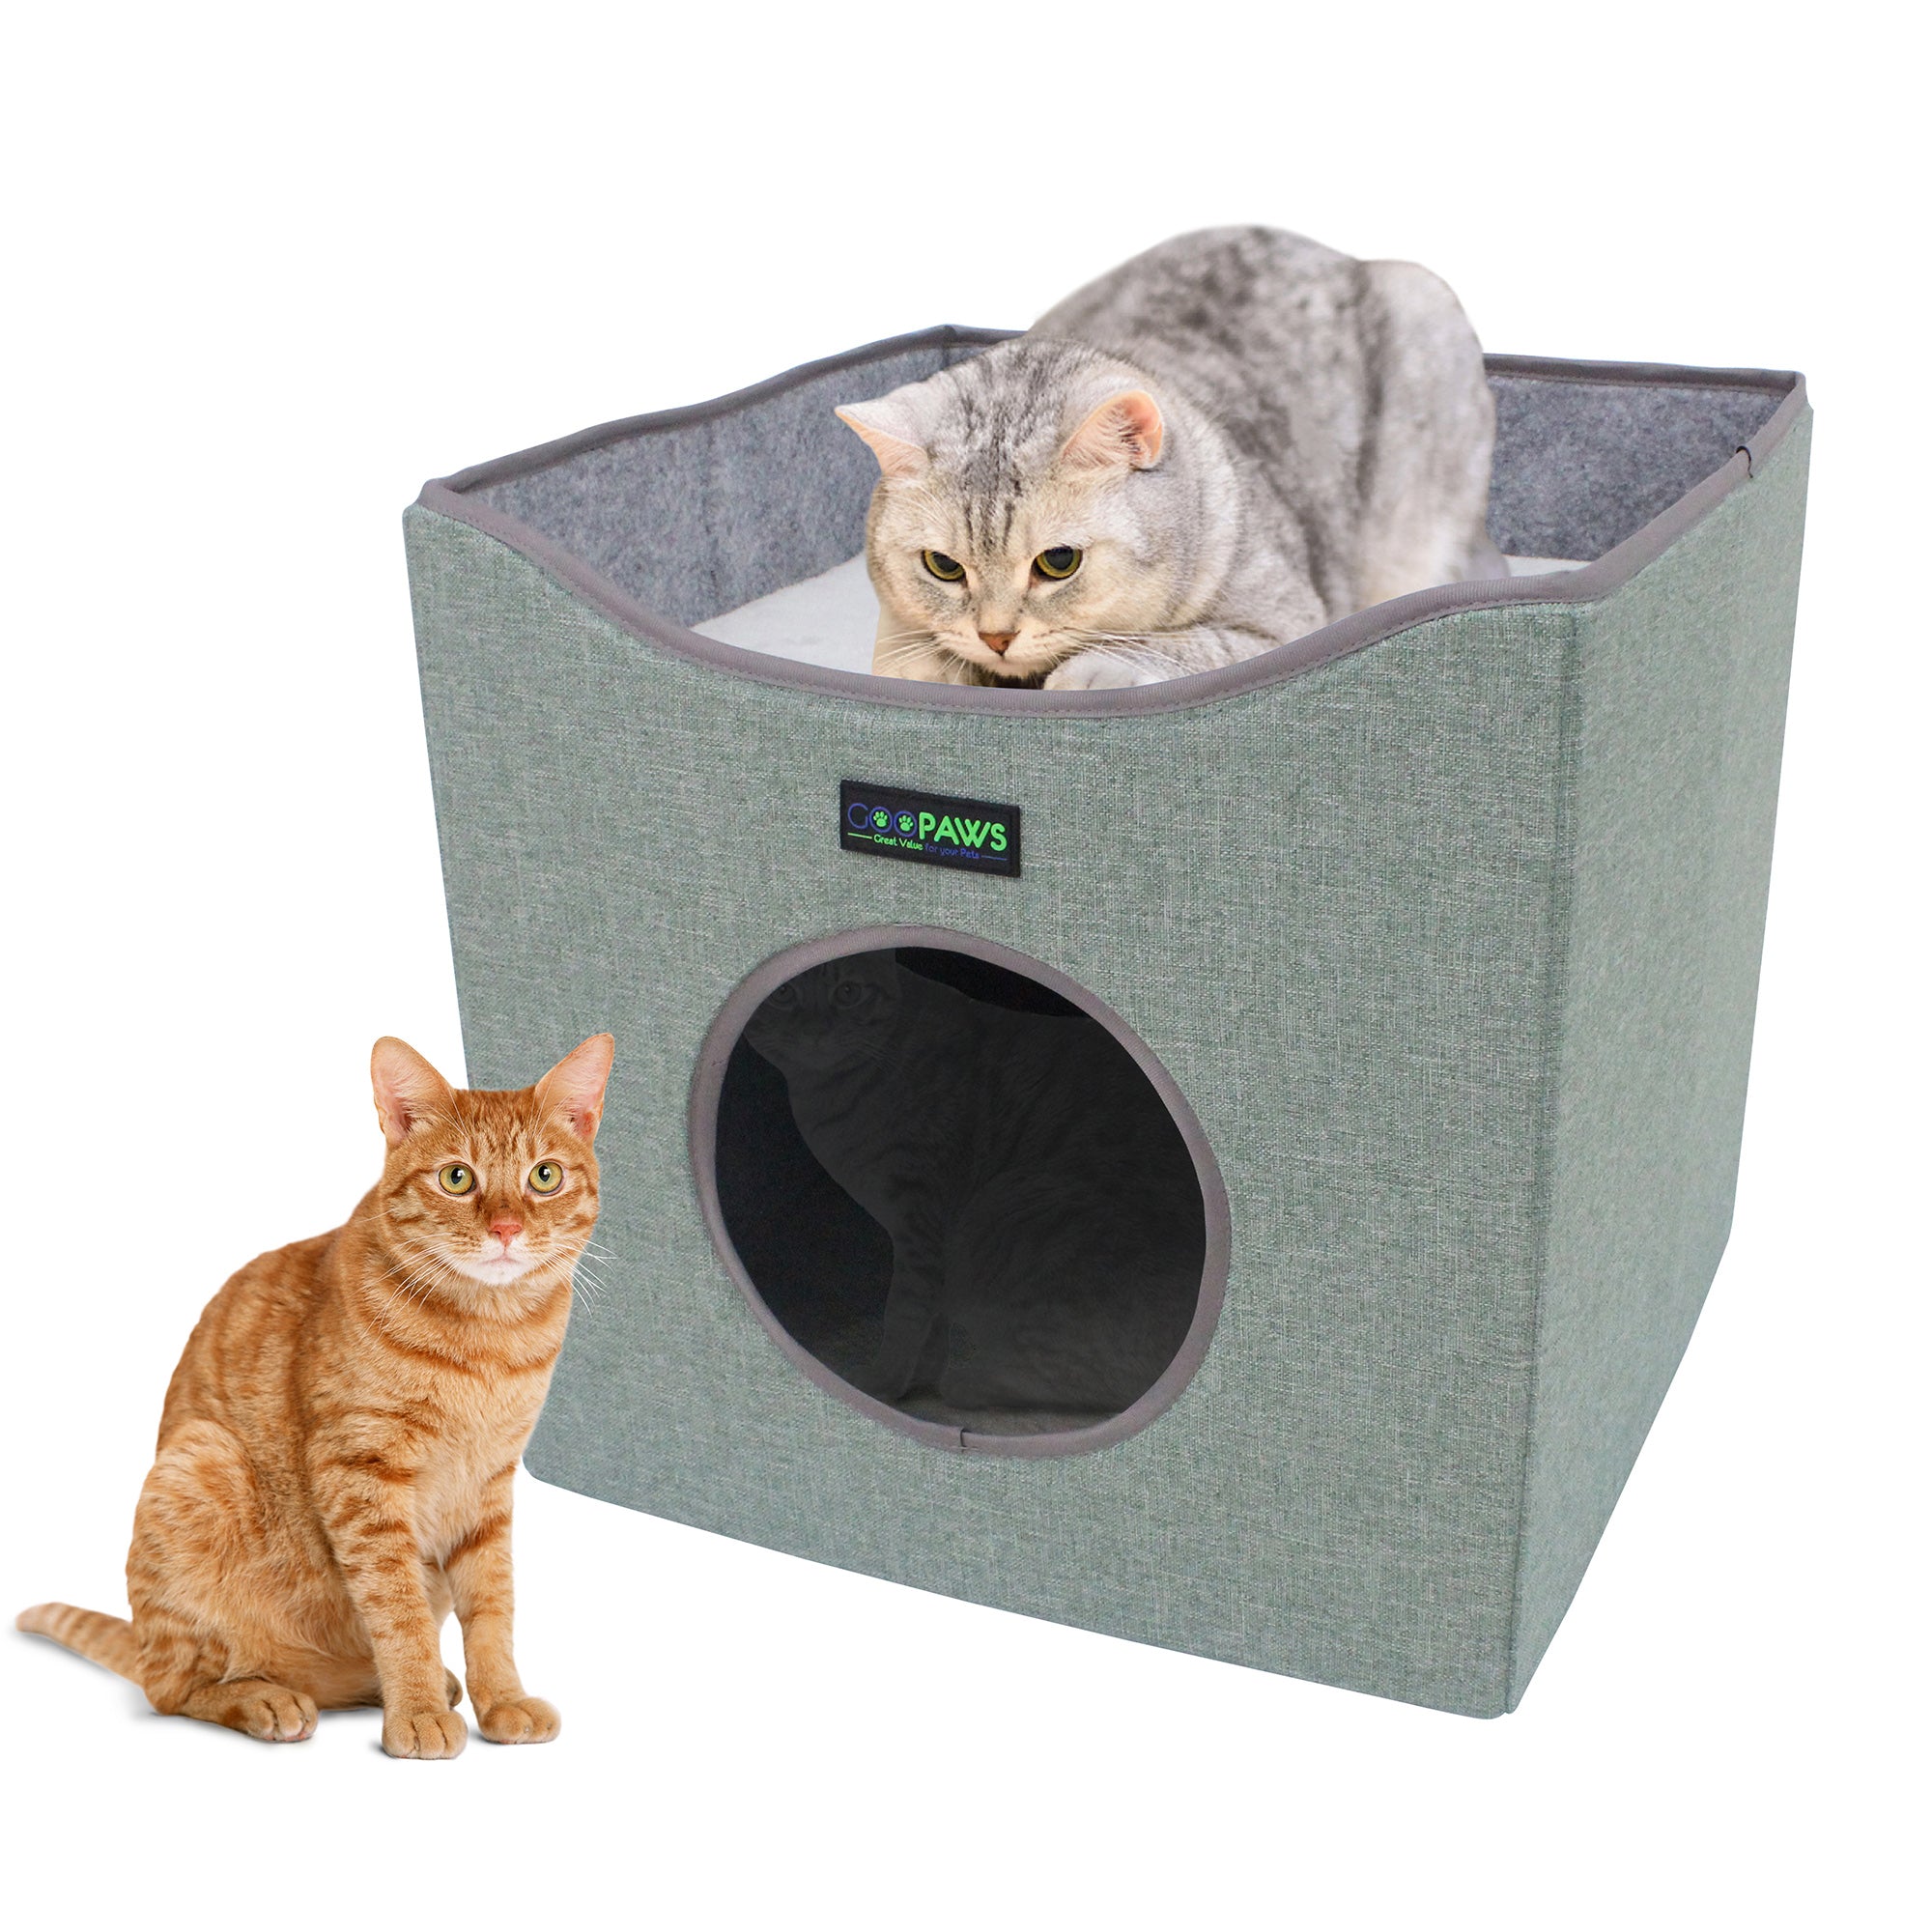 GOOPAWS Foldable Cat Condo, Cat Cube House & Sleeper Bed Cave, Green